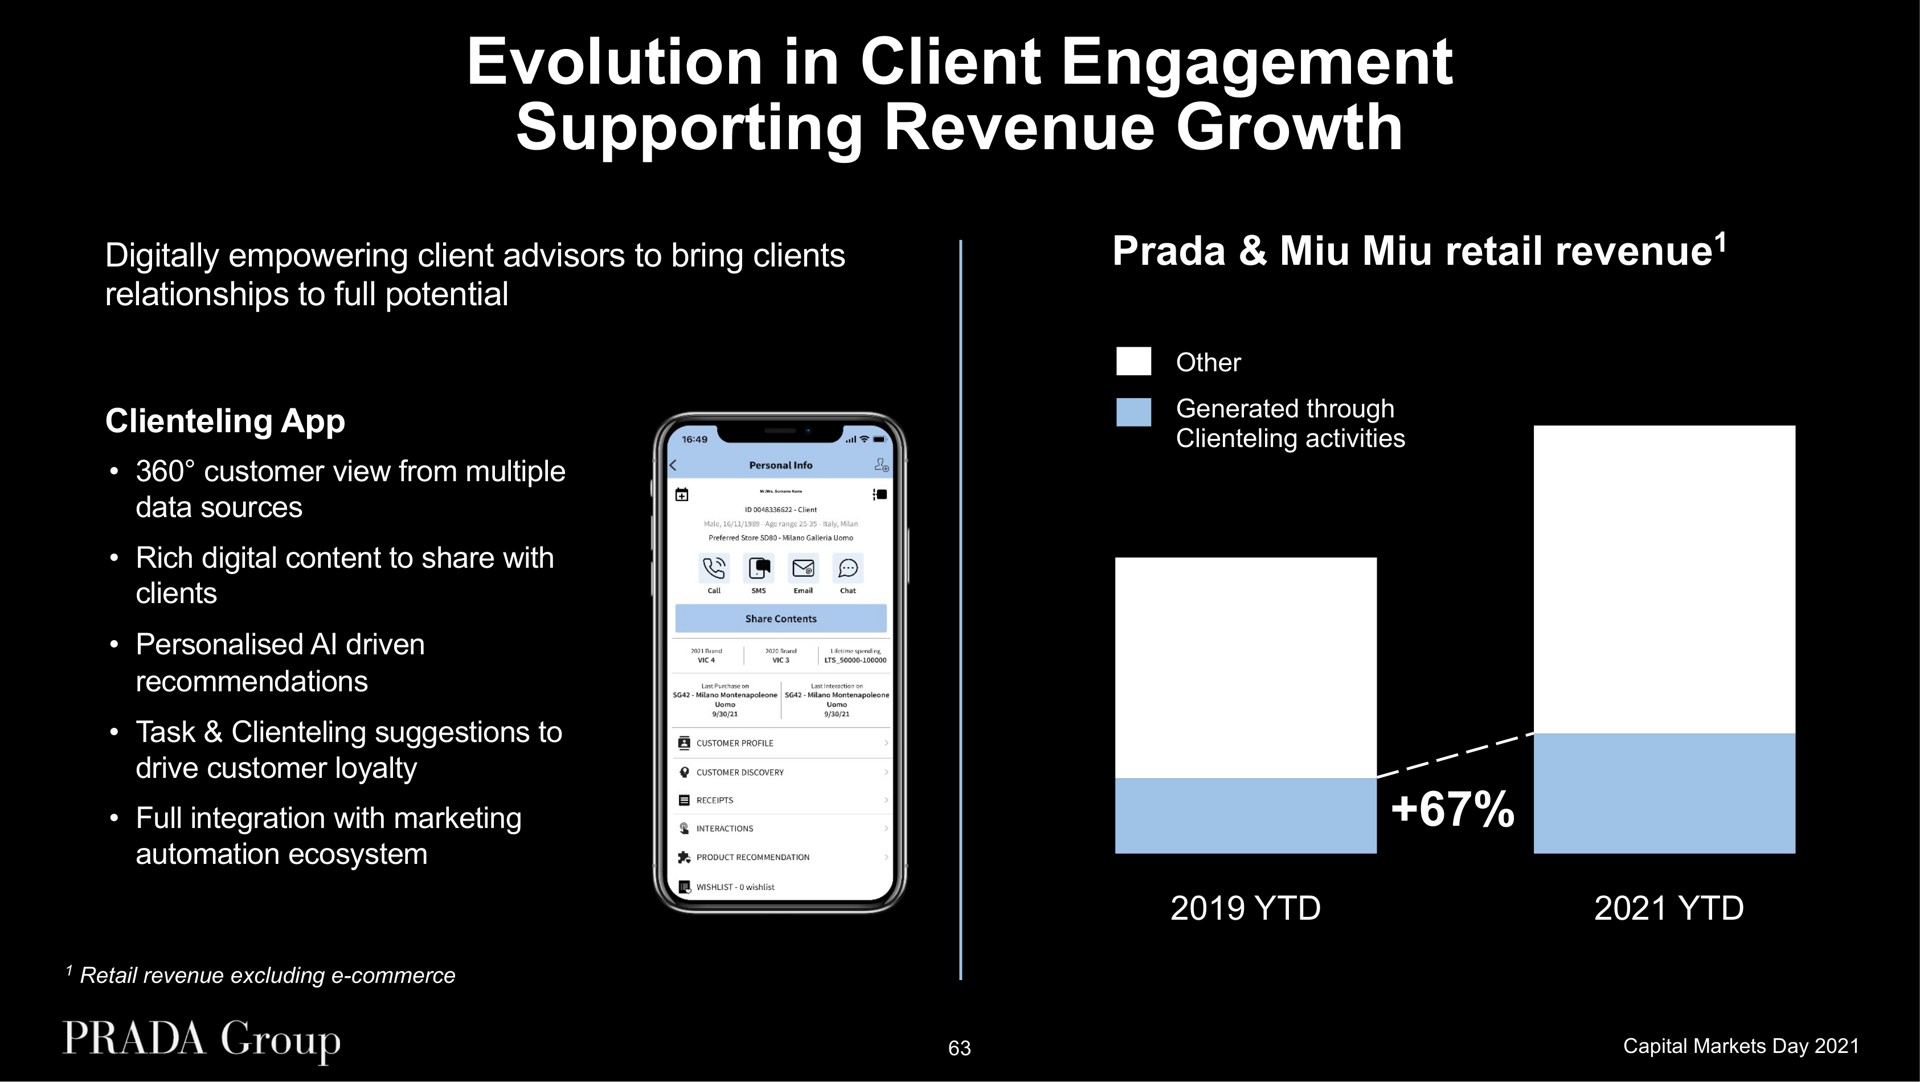 evolution in client engagement supporting revenue growth digitally empowering client advisors to bring clients relationships to full potential retail revenue customer view from multiple data sources rich digital content to share with clients driven recommendations task suggestions to drive customer loyalty full integration with marketing ecosystem | Prada